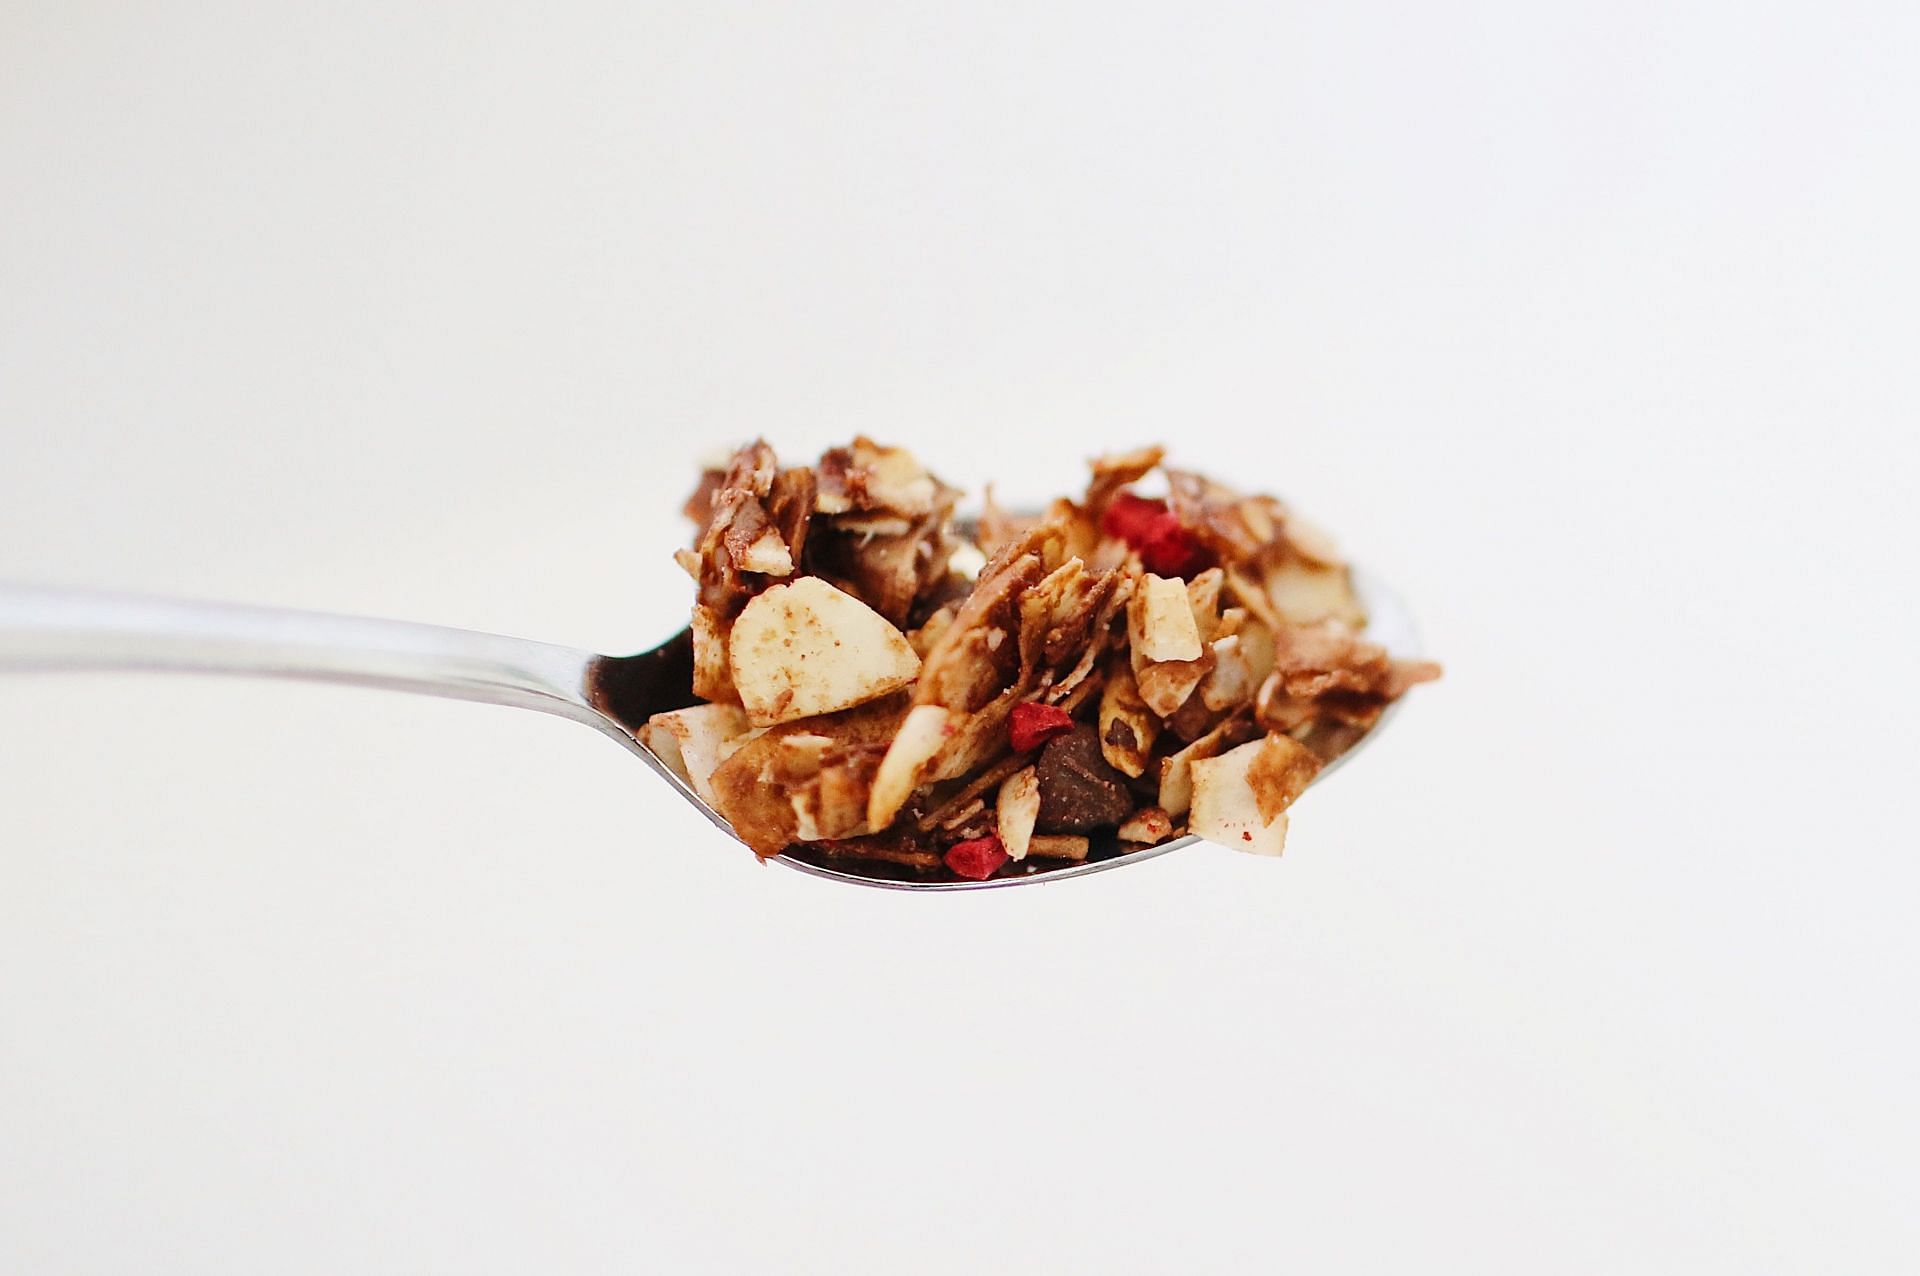 Pairing cereals with nuts and seeds can make them more nutritious (Image via Unsplash/Fallon Michael)